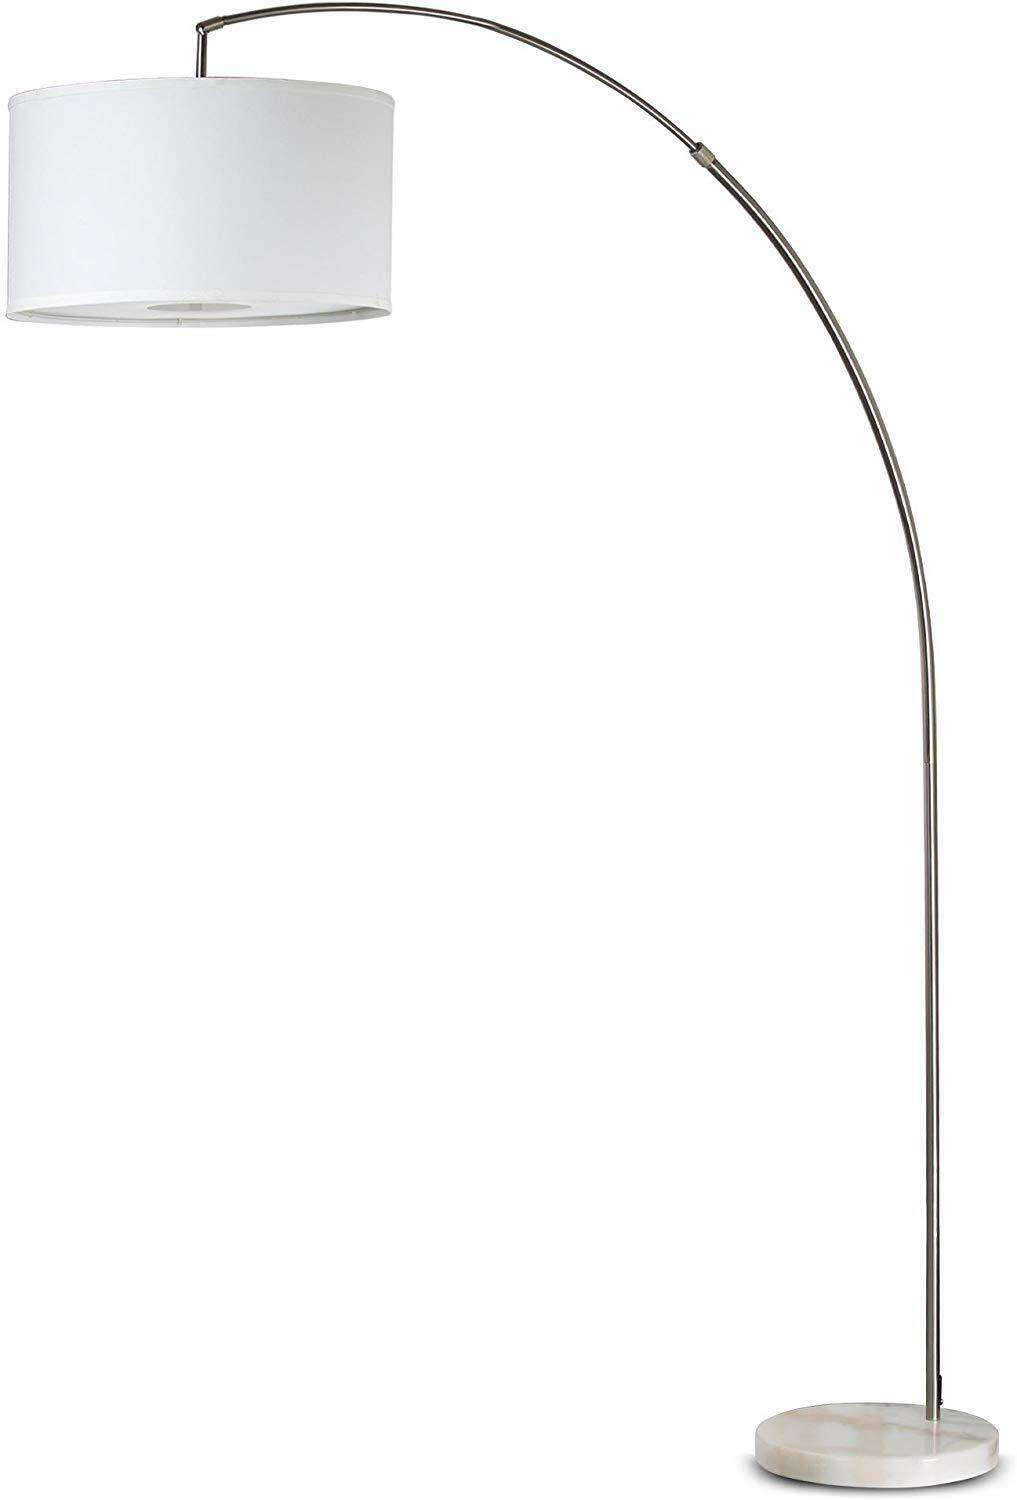 78h Metal Adjustable Arch Floor Lamp With Hanging Shade Marble Base White in size 1017 X 1500